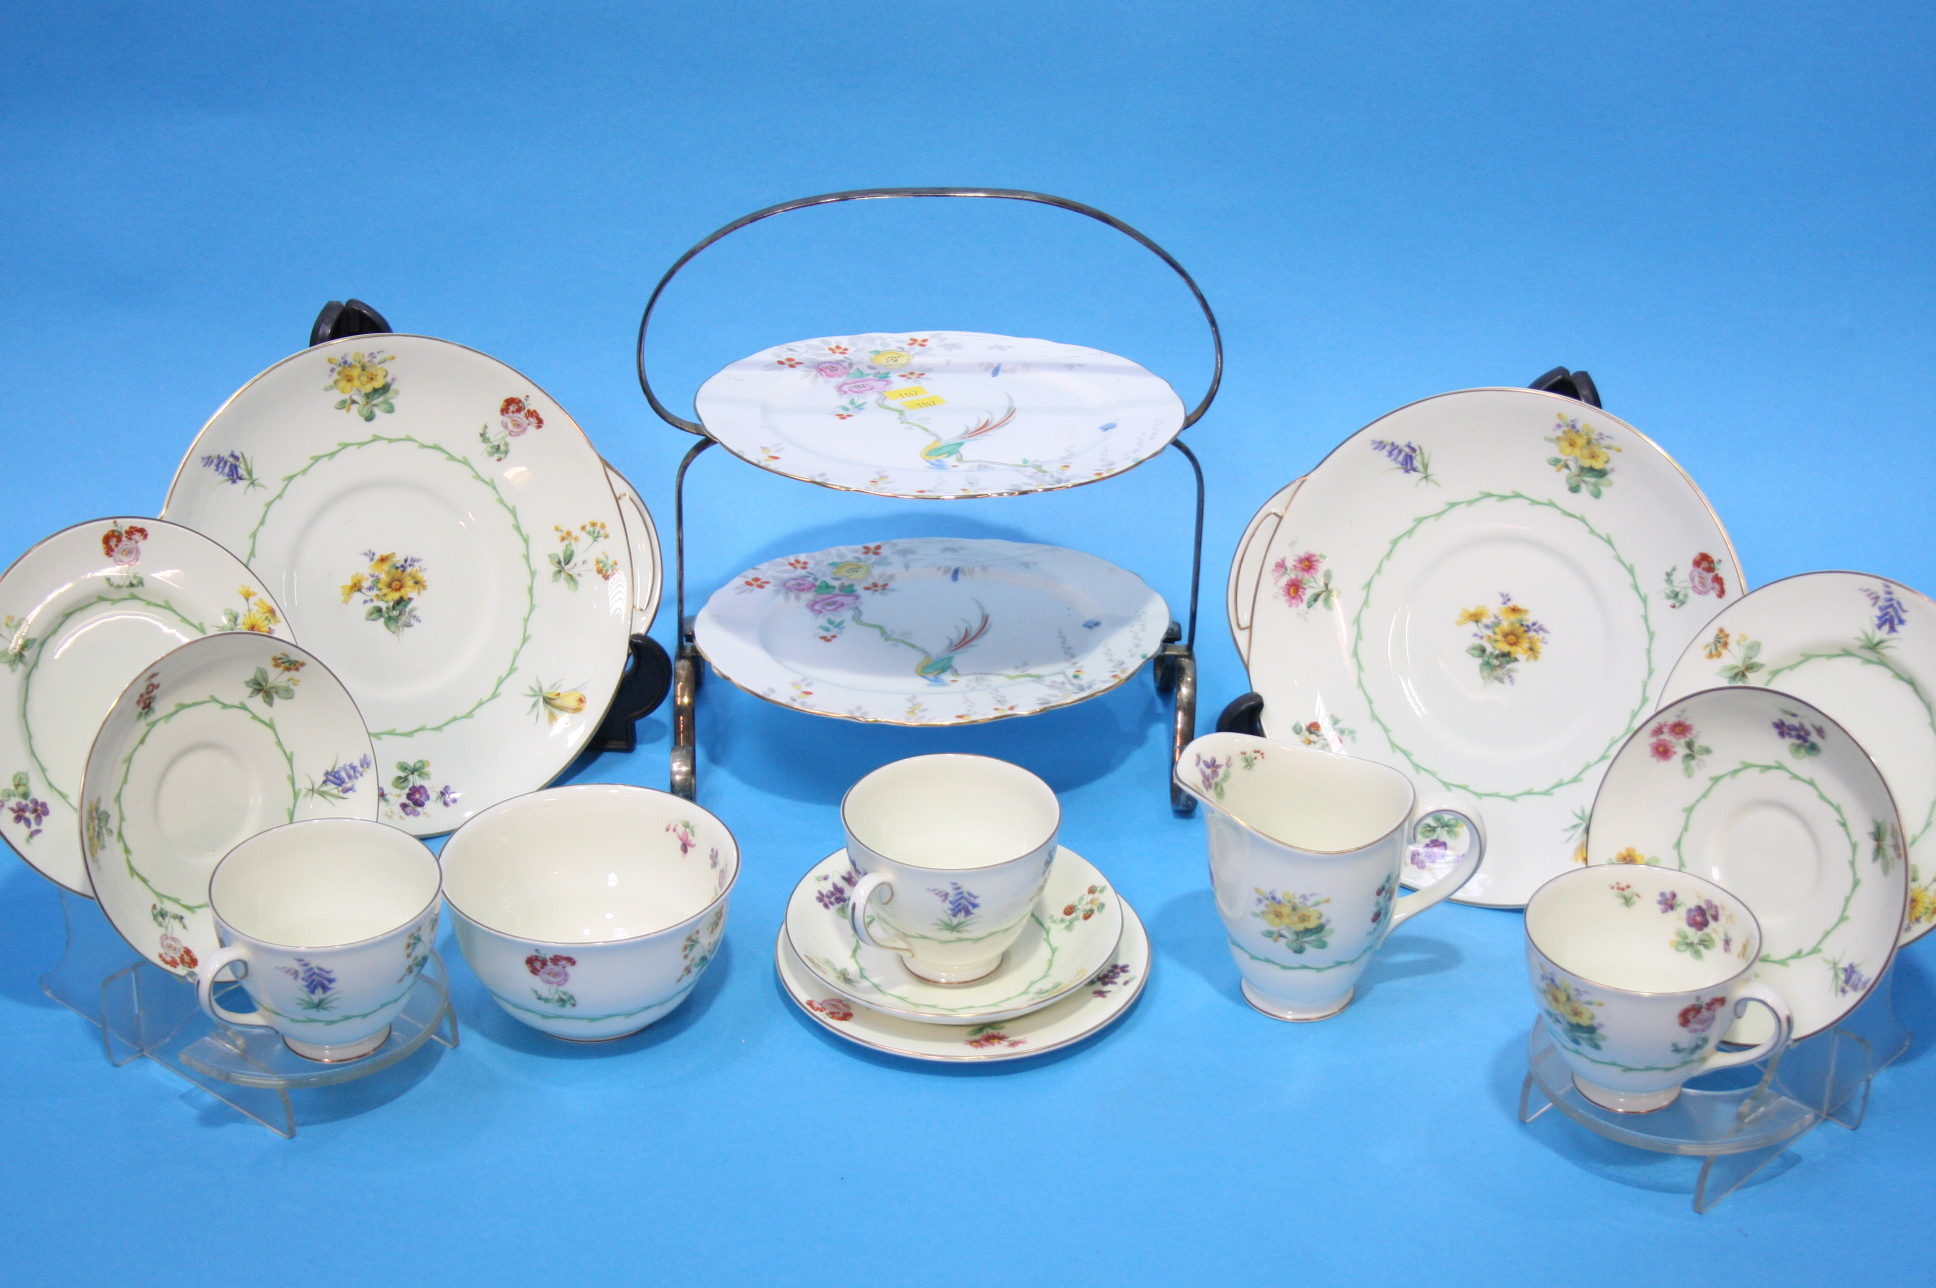 A Royal Doulton floral tea set and a cake stand.